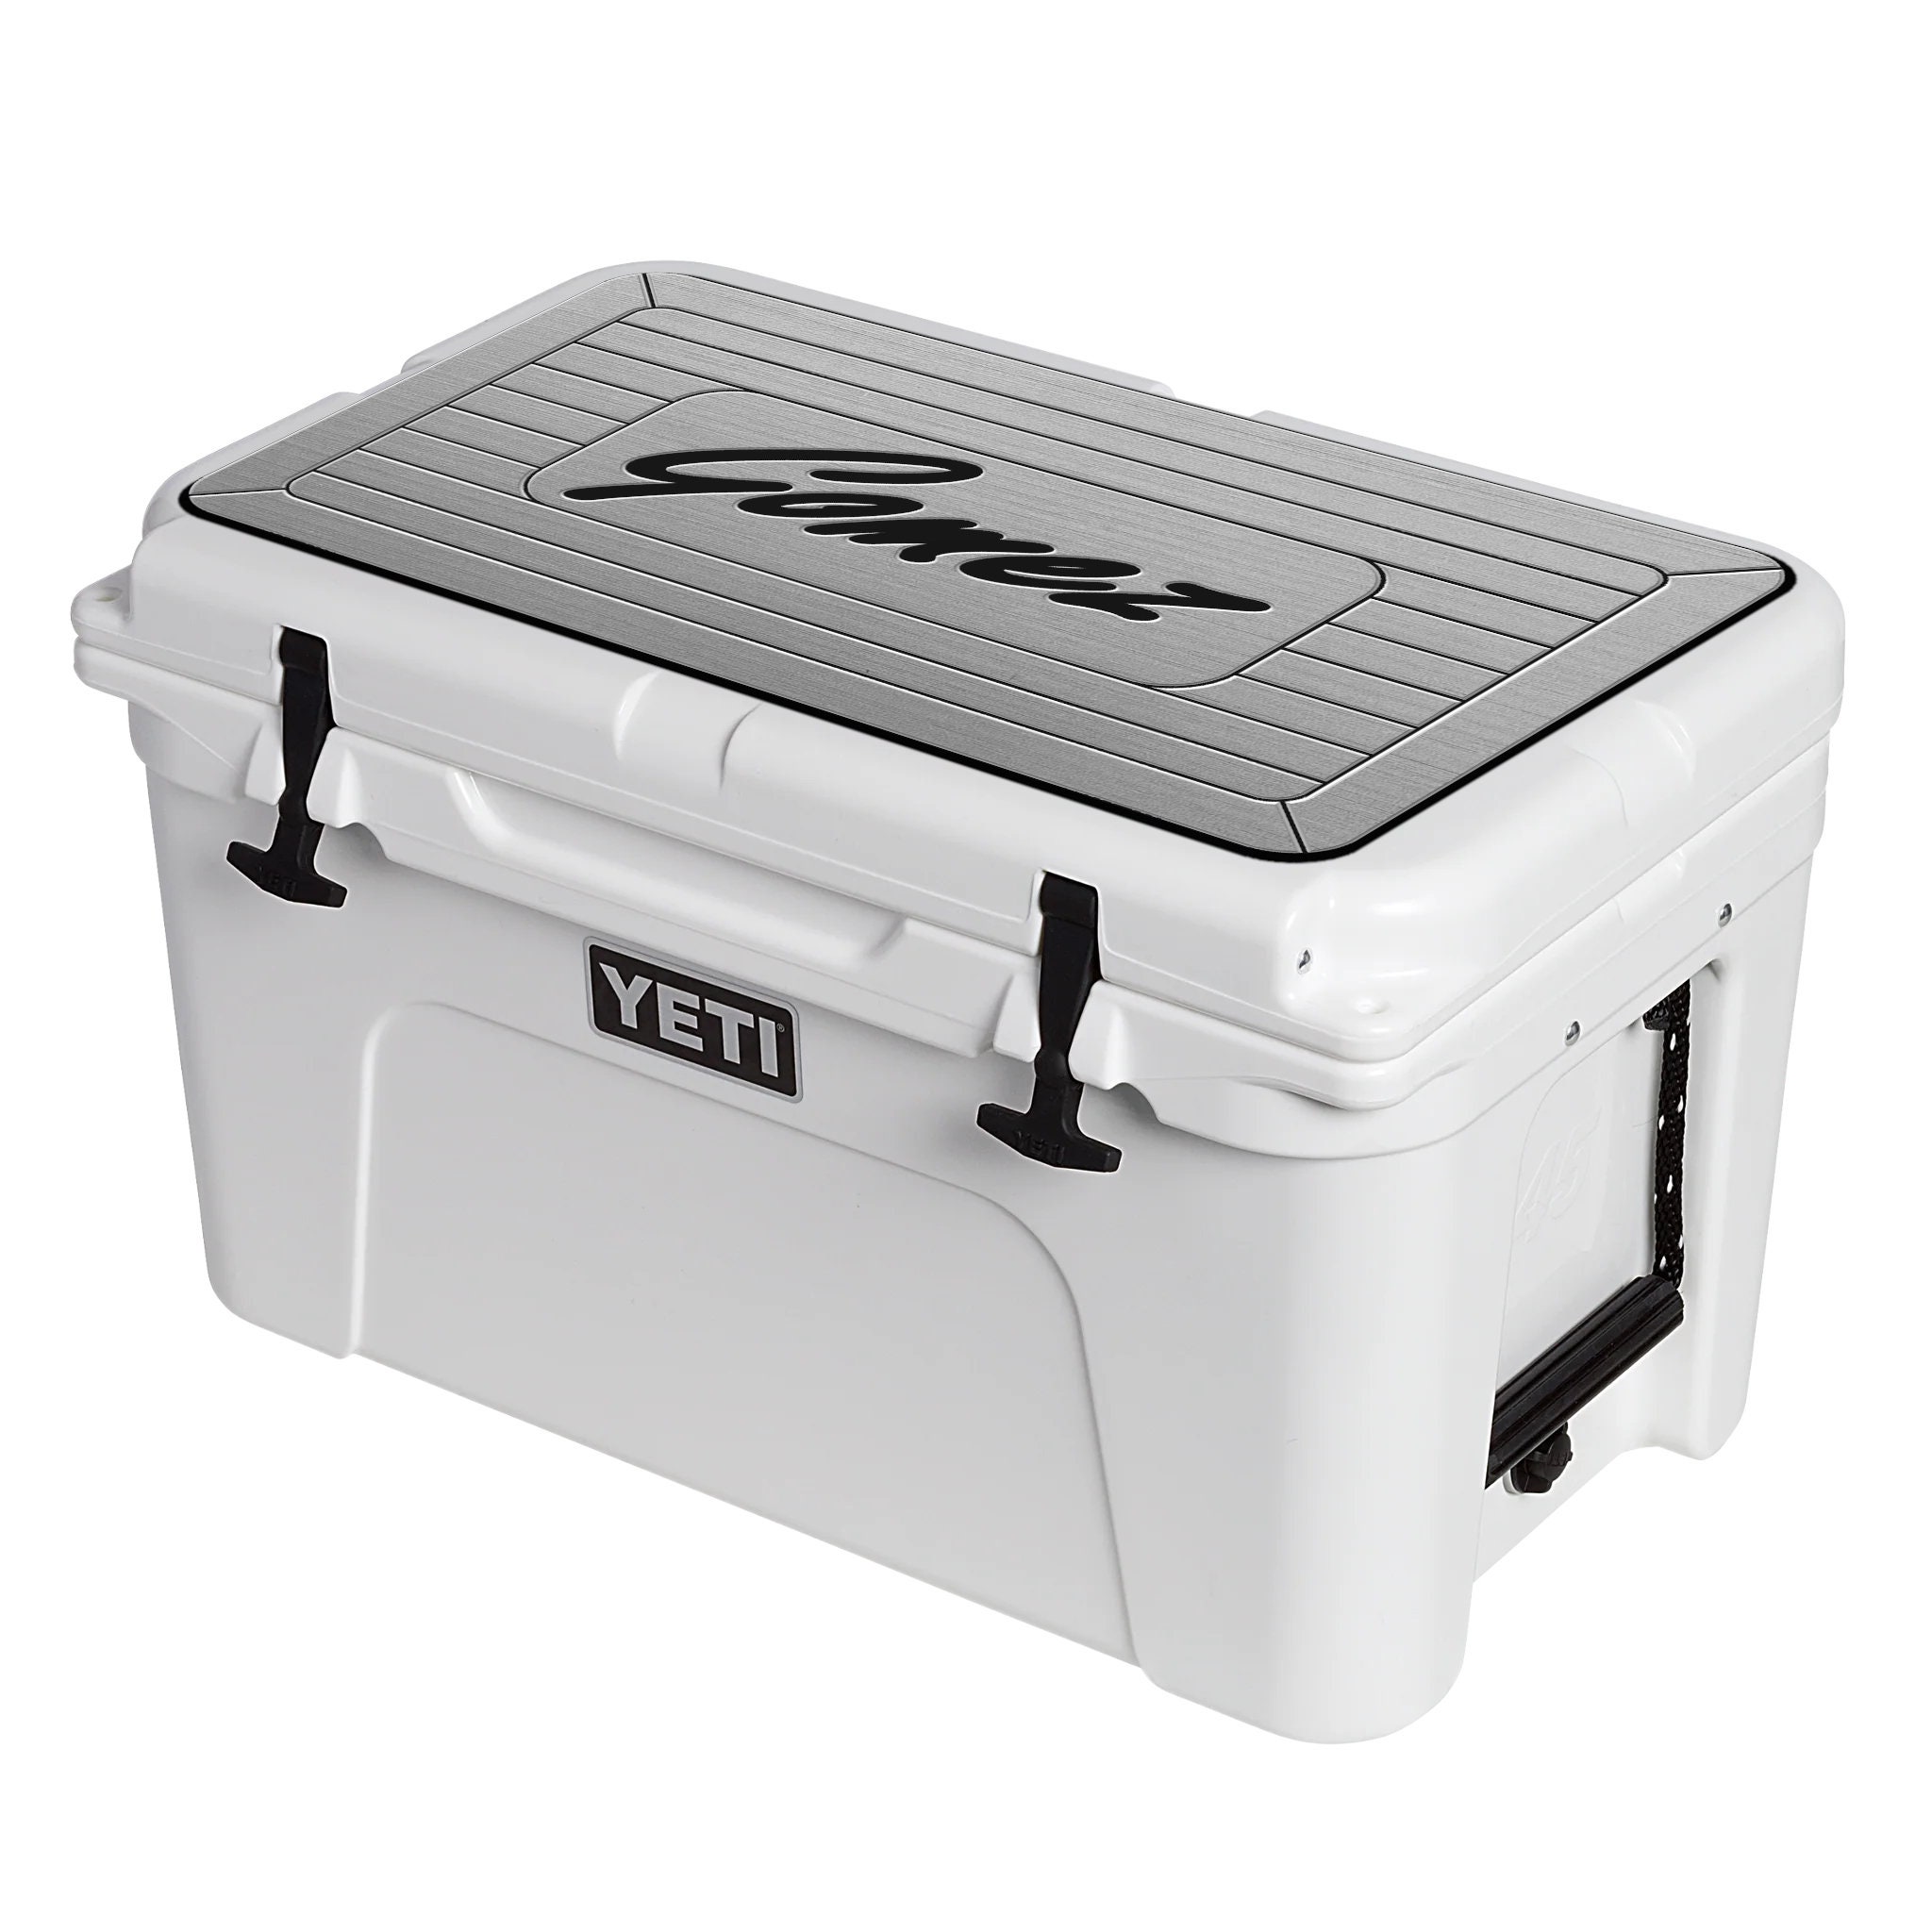 Cocktail shaker lid : r/YetiCoolers